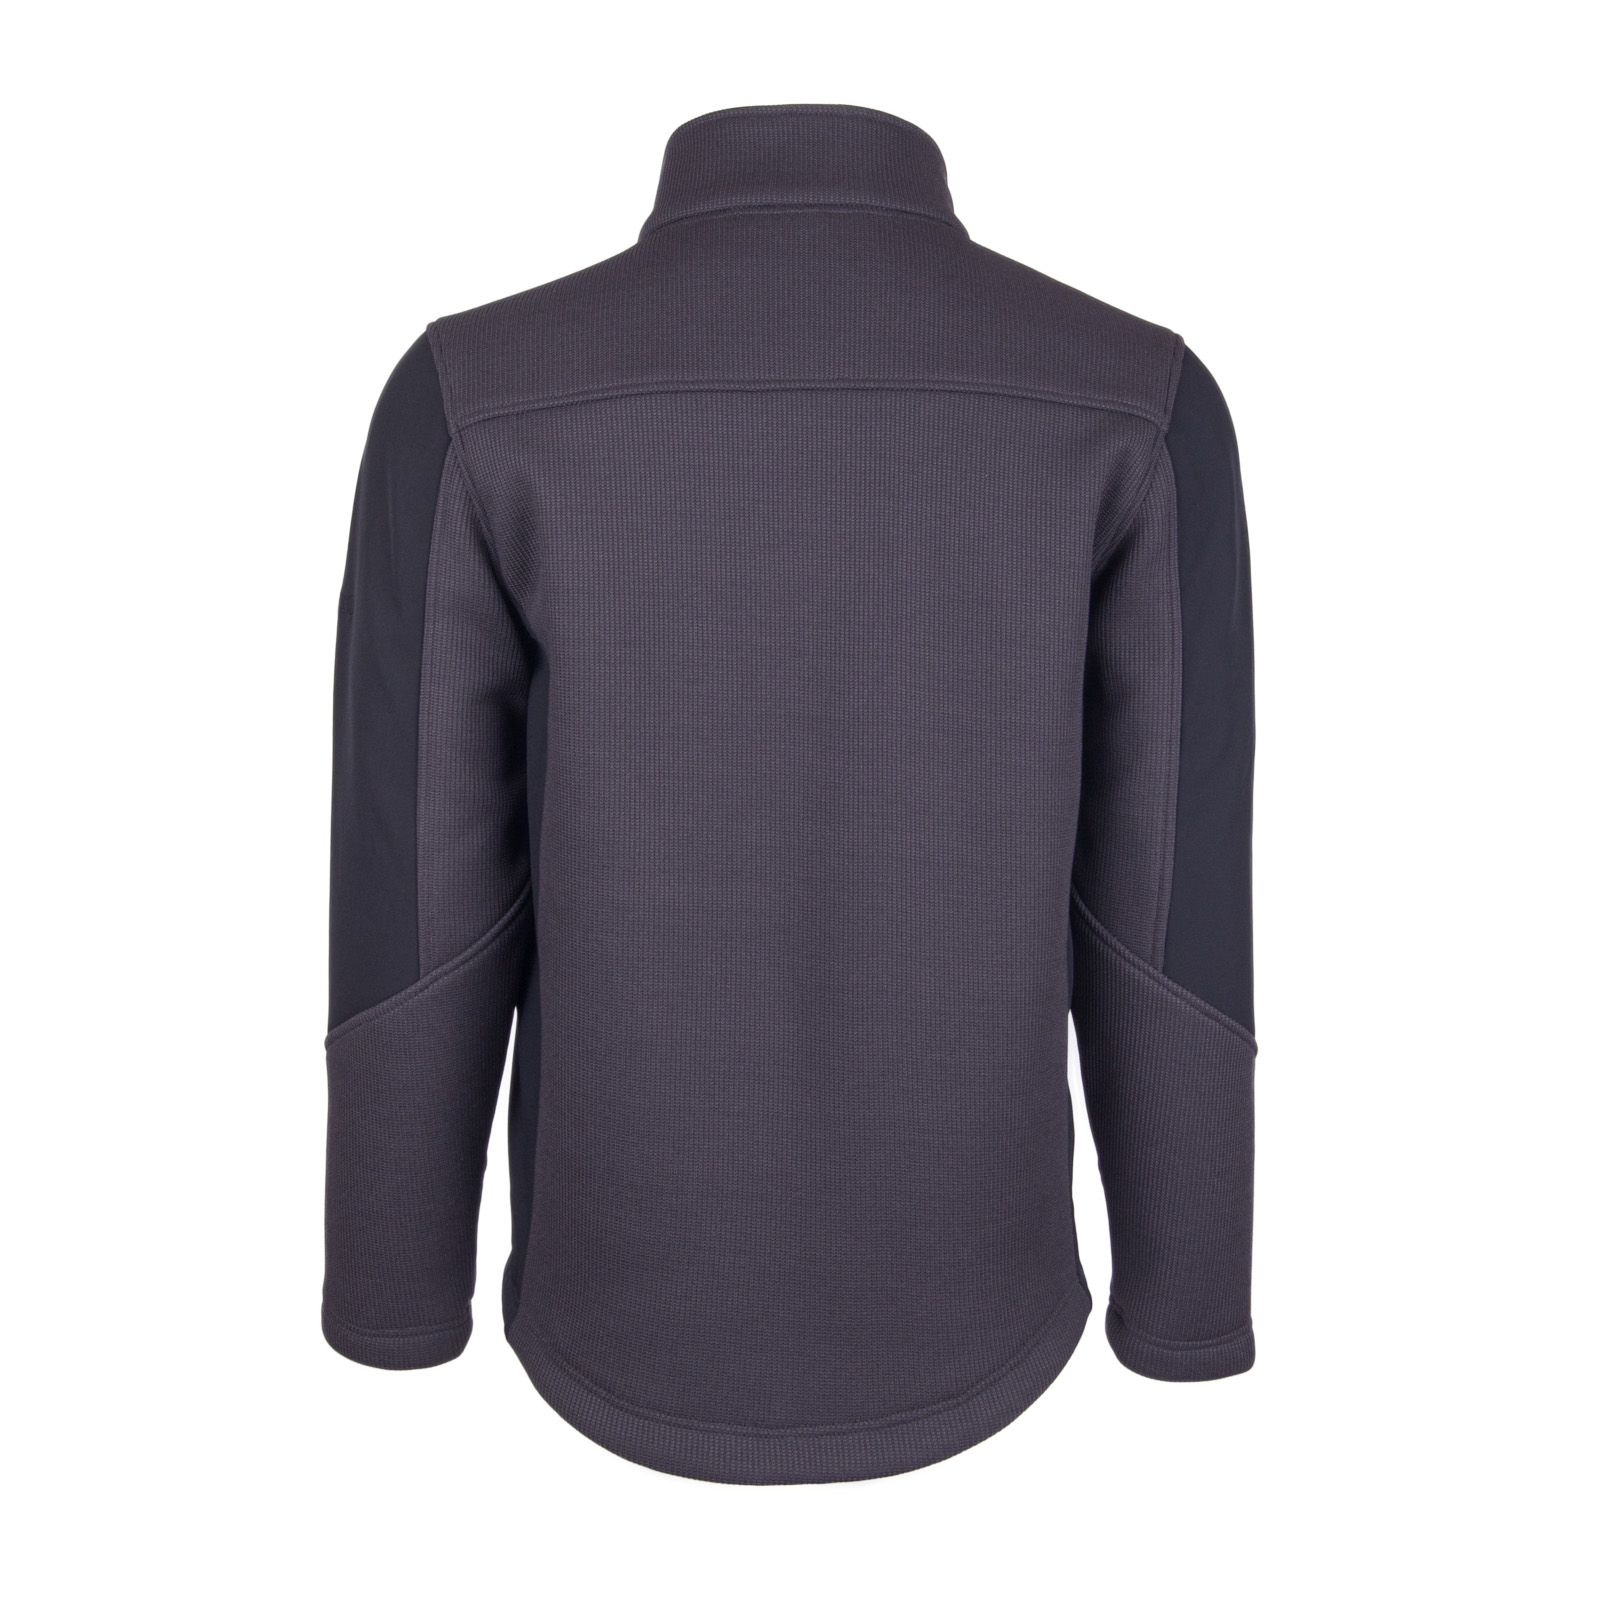 Sweater Fleece Jacket with Soft Shell Overlay – Pacific Trail